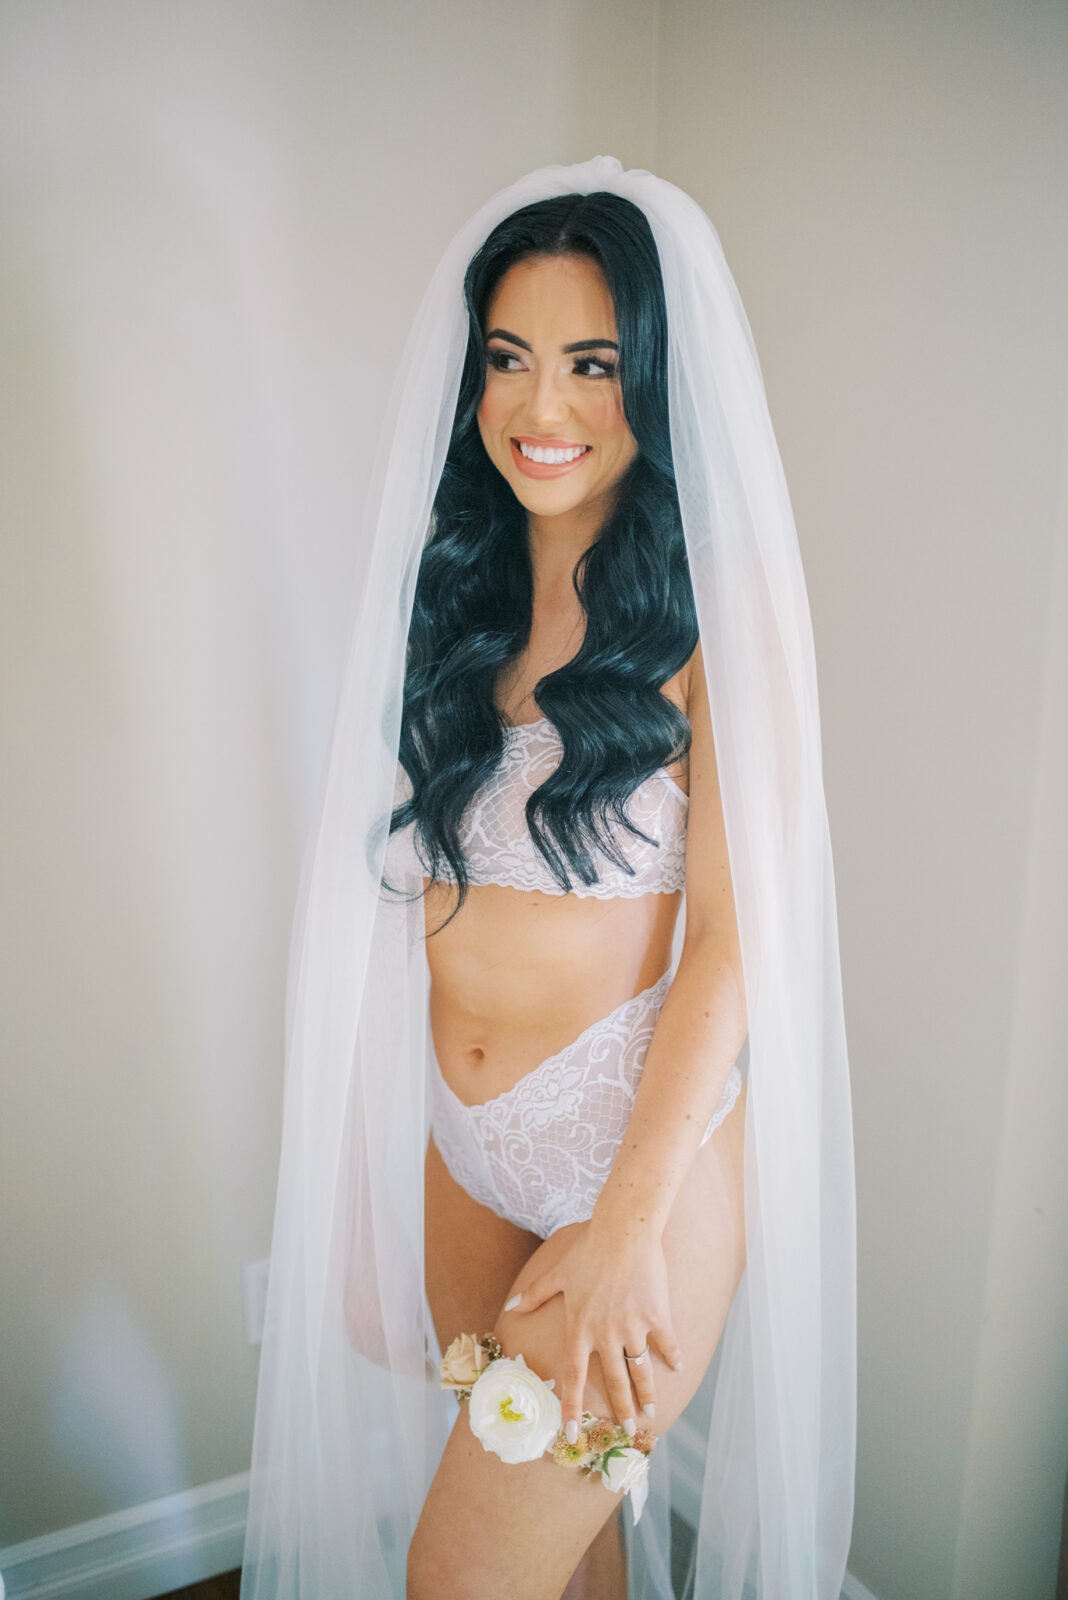 bridal boudoir portraits with veil, intimate bridal portrait with floral garter in a fall theme colour palette, white lace wedding day lingerie for bridal photoshoot